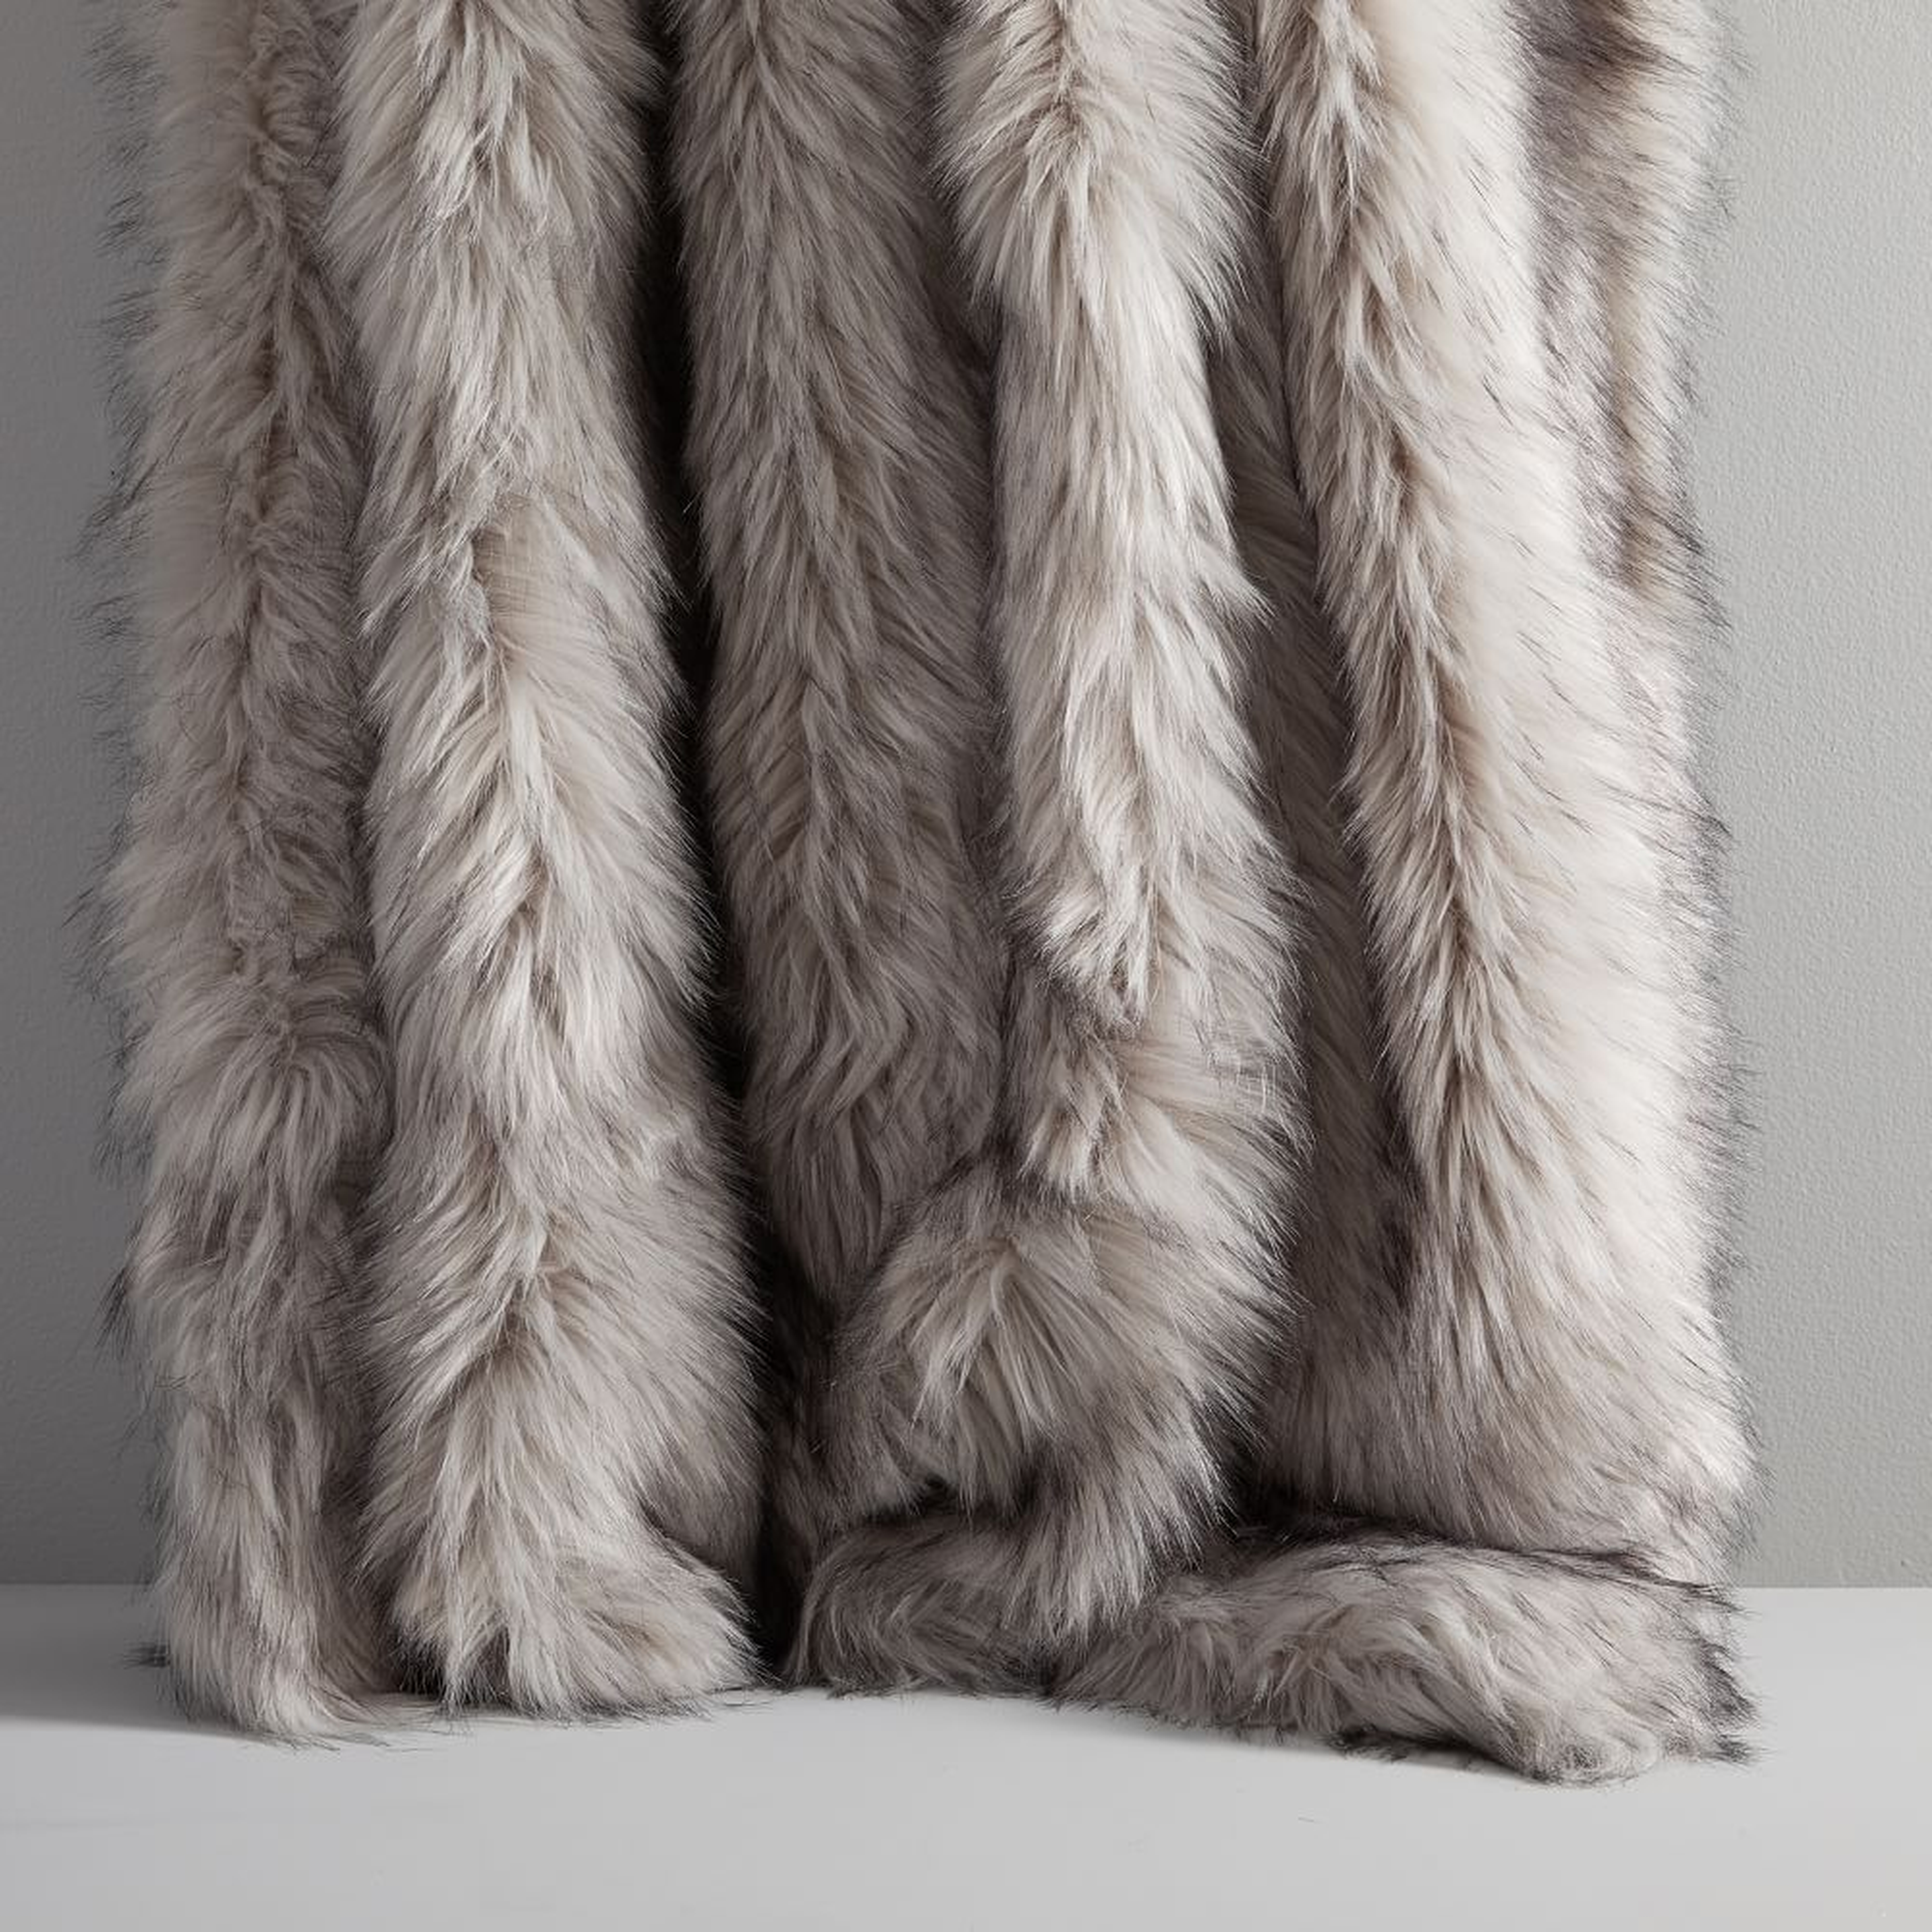 Faux Fur Brushed Tips Throw, 47"x60", Pearl Gray - West Elm